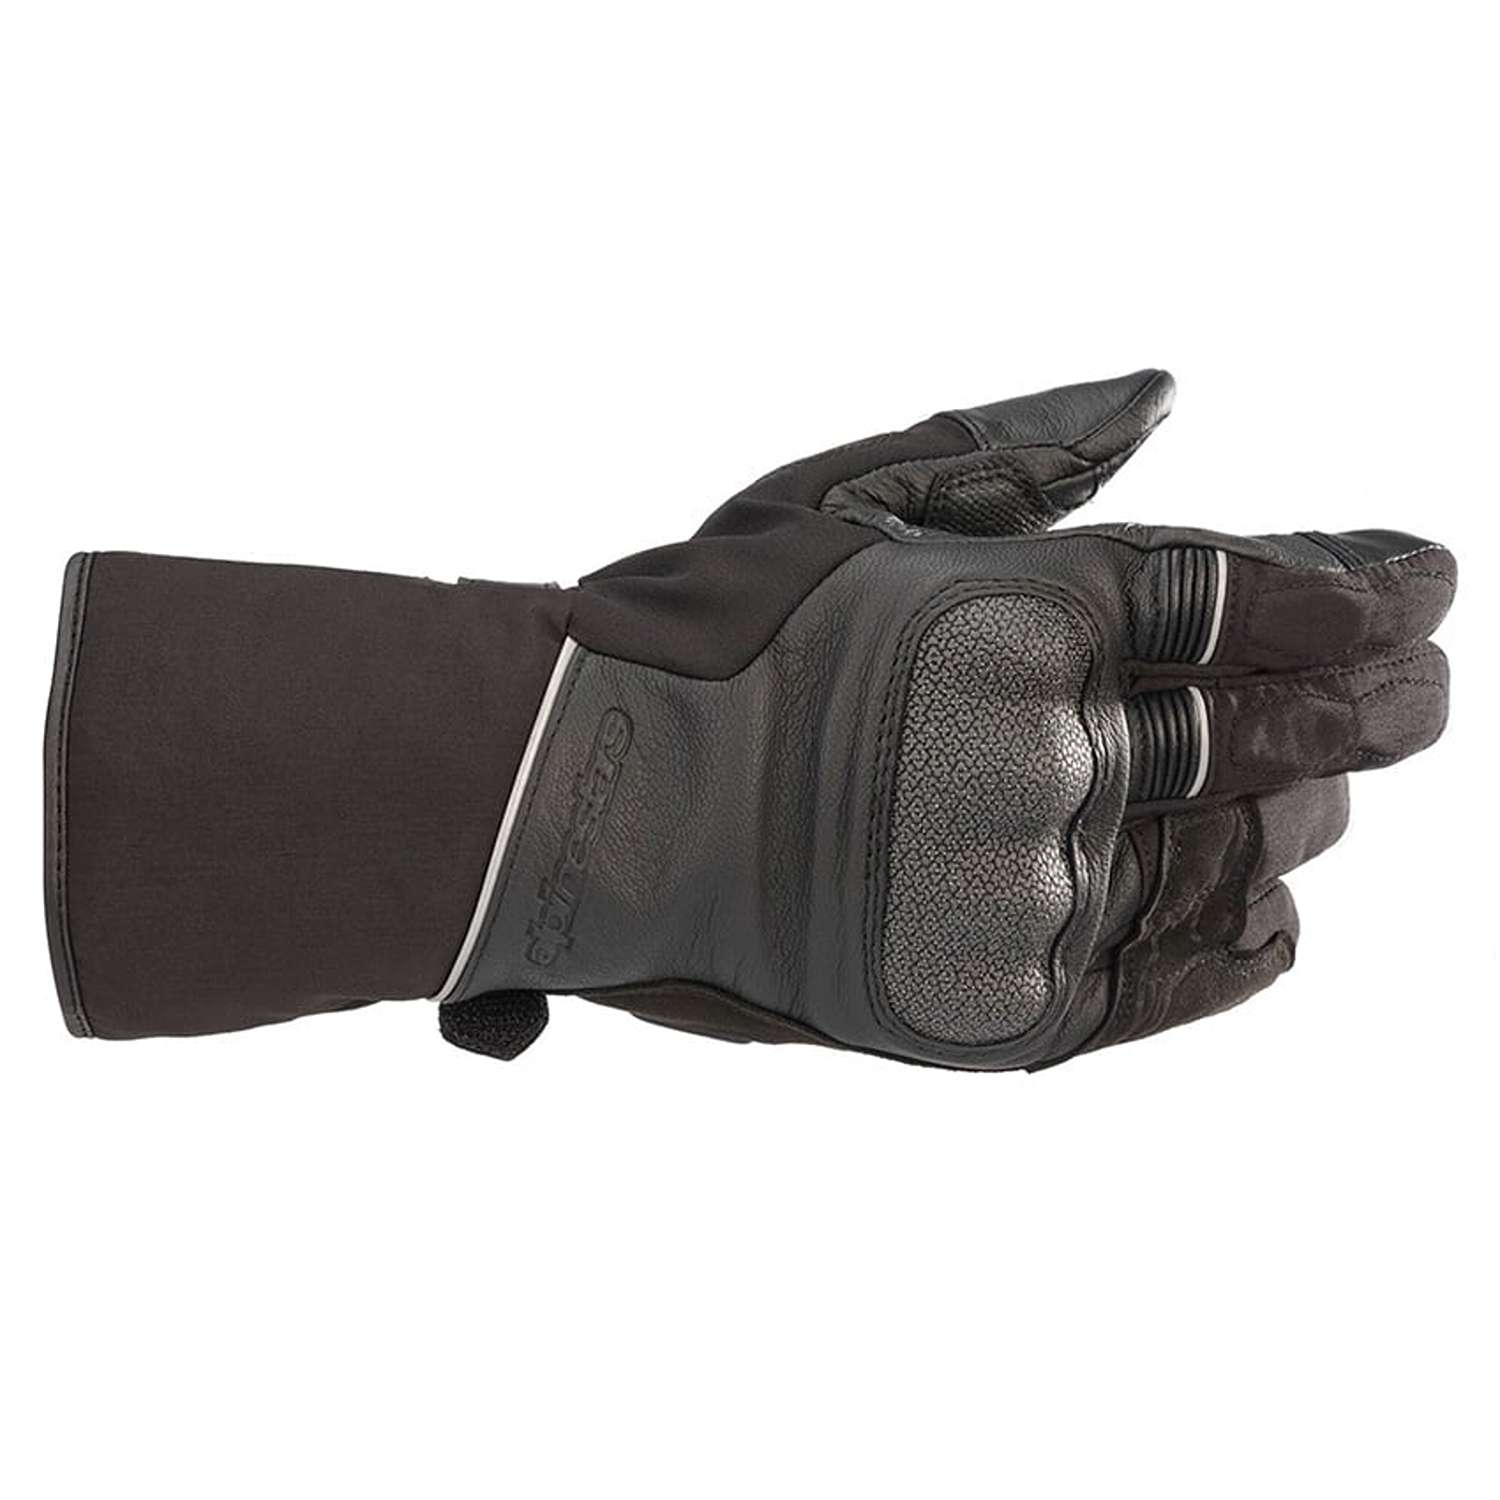 Image of Alpinestars Wr-2 V2 Gore-Tex Gloves With Gore Grip Technology Black Size 2XL ID 8059175098550